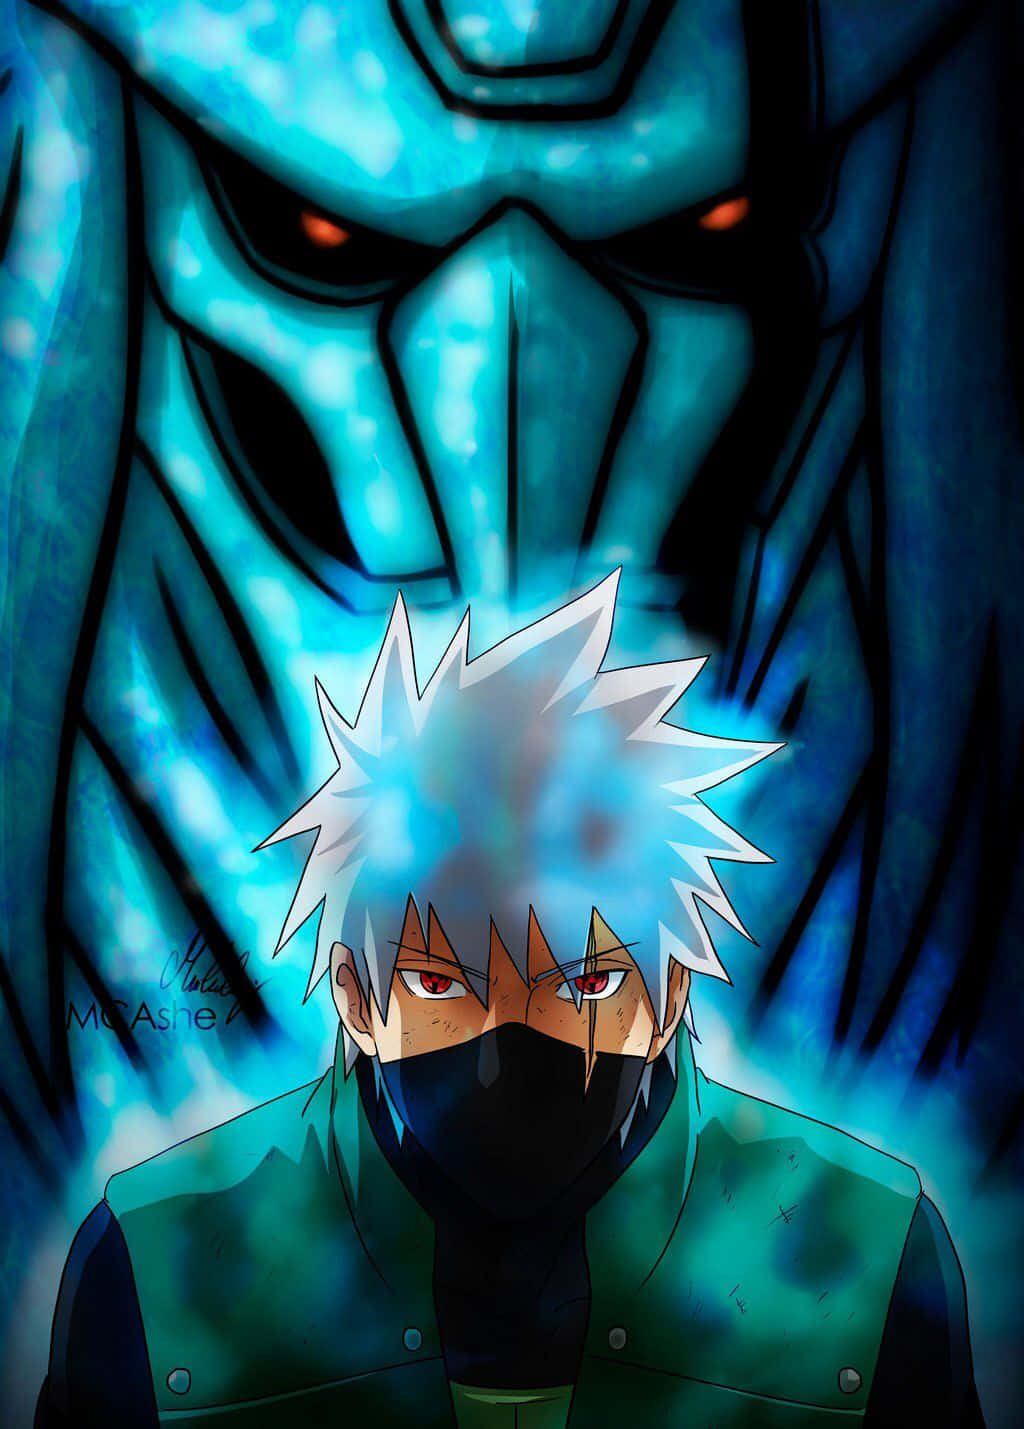 Experience the power of Susanoo, as manifested by Kakashi Wallpaper